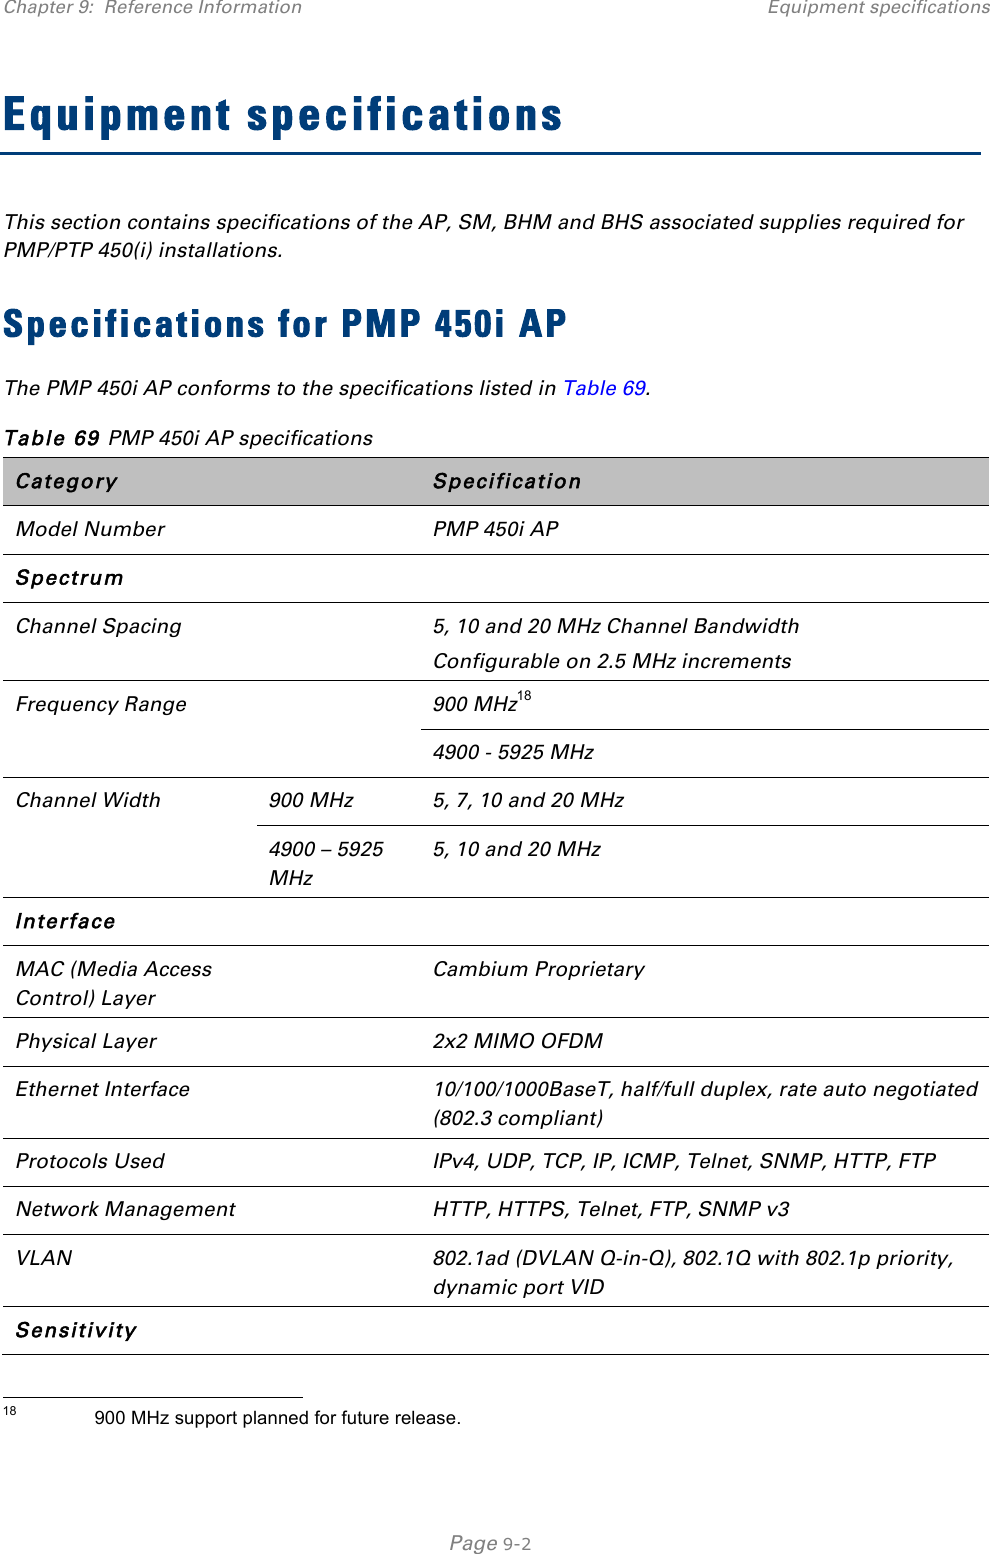 Chapter 9:  Reference Information Equipment specifications   Page 9-2 Equipment specifications This section contains specifications of the AP, SM, BHM and BHS associated supplies required for PMP/PTP 450(i) installations. Specifications for PMP 450i AP The PMP 450i AP conforms to the specifications listed in Table 69. Table 69 PMP 450i AP specifications Category  Specification Model Number  PMP 450i AP Spectrum   Channel Spacing  5, 10 and 20 MHz Channel Bandwidth Configurable on 2.5 MHz increments Frequency Range  900 MHz18 4900 - 5925 MHz Channel Width 900 MHz 5, 7, 10 and 20 MHz 4900 – 5925 MHz 5, 10 and 20 MHz Interface   MAC (Media Access Control) Layer  Cambium Proprietary Physical Layer  2x2 MIMO OFDM Ethernet Interface  10/100/1000BaseT, half/full duplex, rate auto negotiated (802.3 compliant) Protocols Used  IPv4, UDP, TCP, IP, ICMP, Telnet, SNMP, HTTP, FTP Network Management  HTTP, HTTPS, Telnet, FTP, SNMP v3 VLAN  802.1ad (DVLAN Q-in-Q), 802.1Q with 802.1p priority, dynamic port VID Sensitivity                                                    18               900 MHz support planned for future release. 